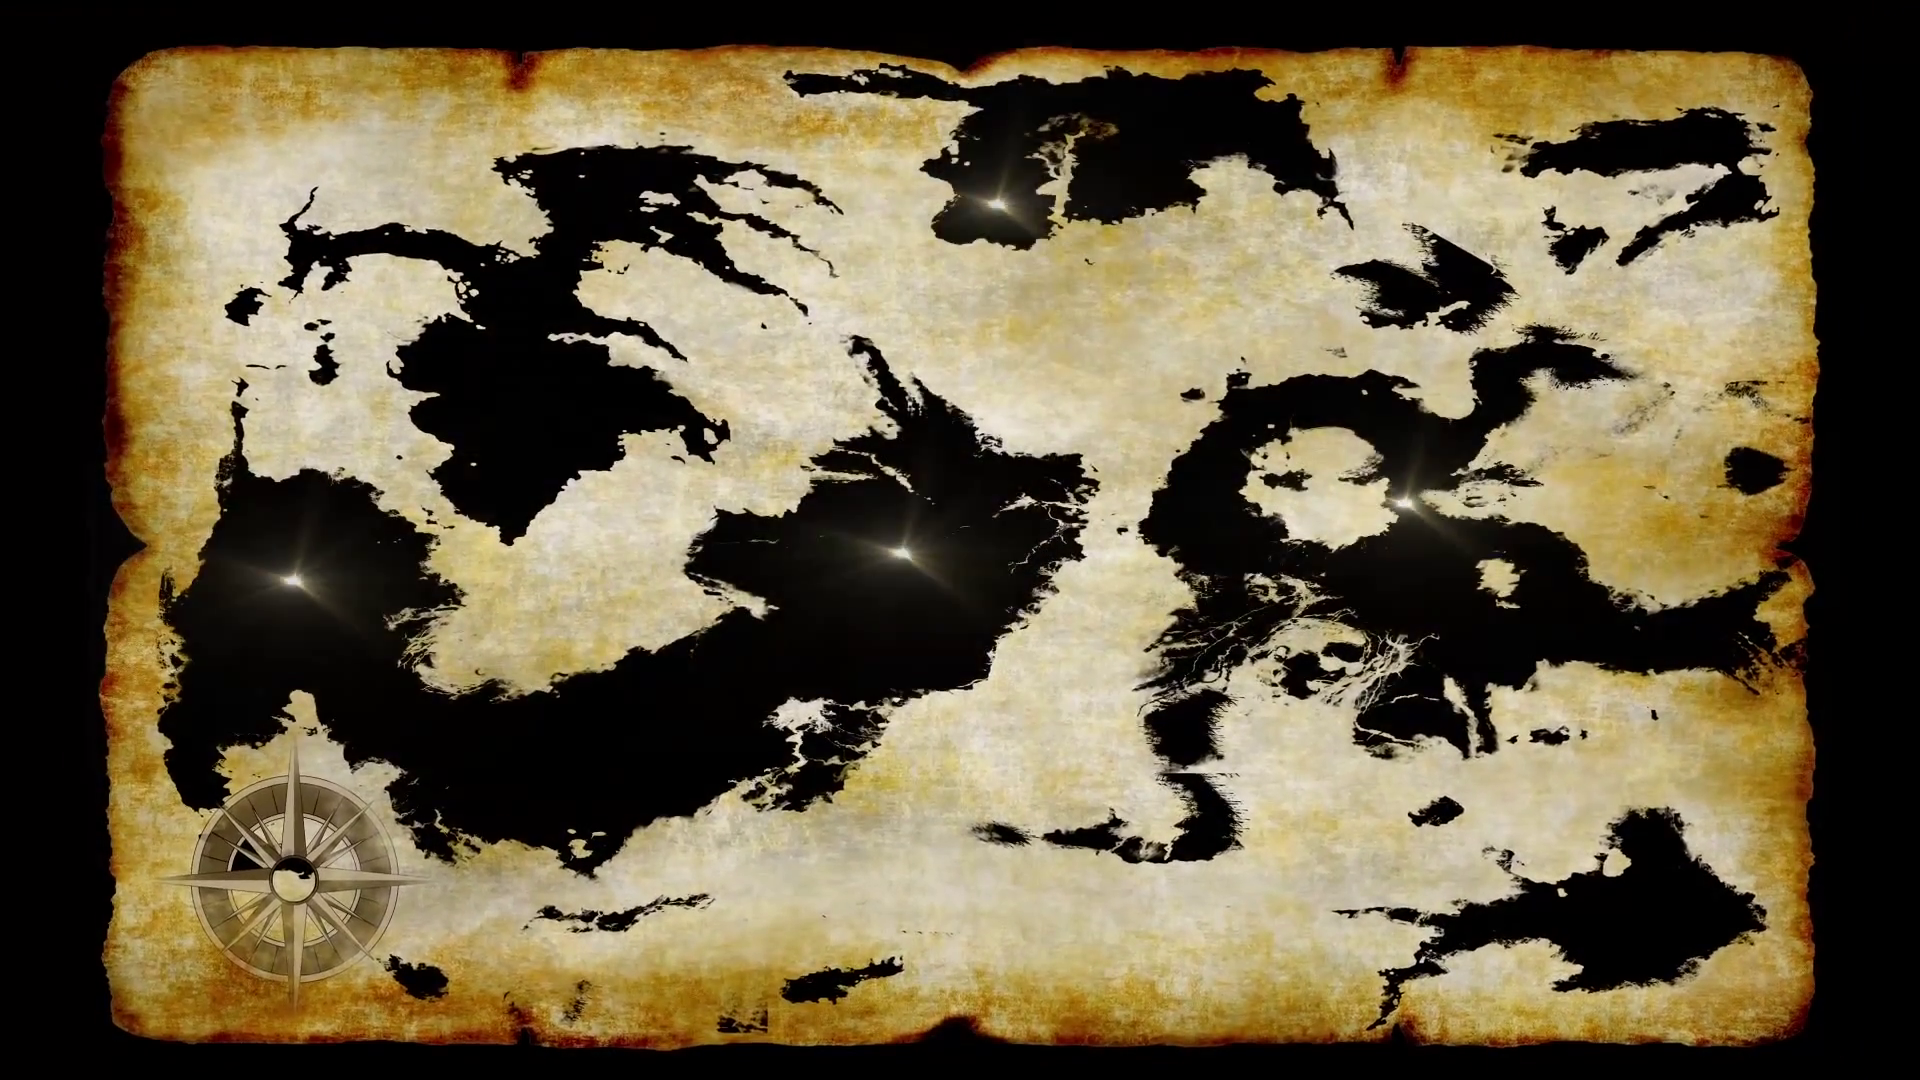 http://vignette2.wikia.nocookie.net/rwby/images/7/72/WorldMap.png/revision/latest?cb=20130902145521